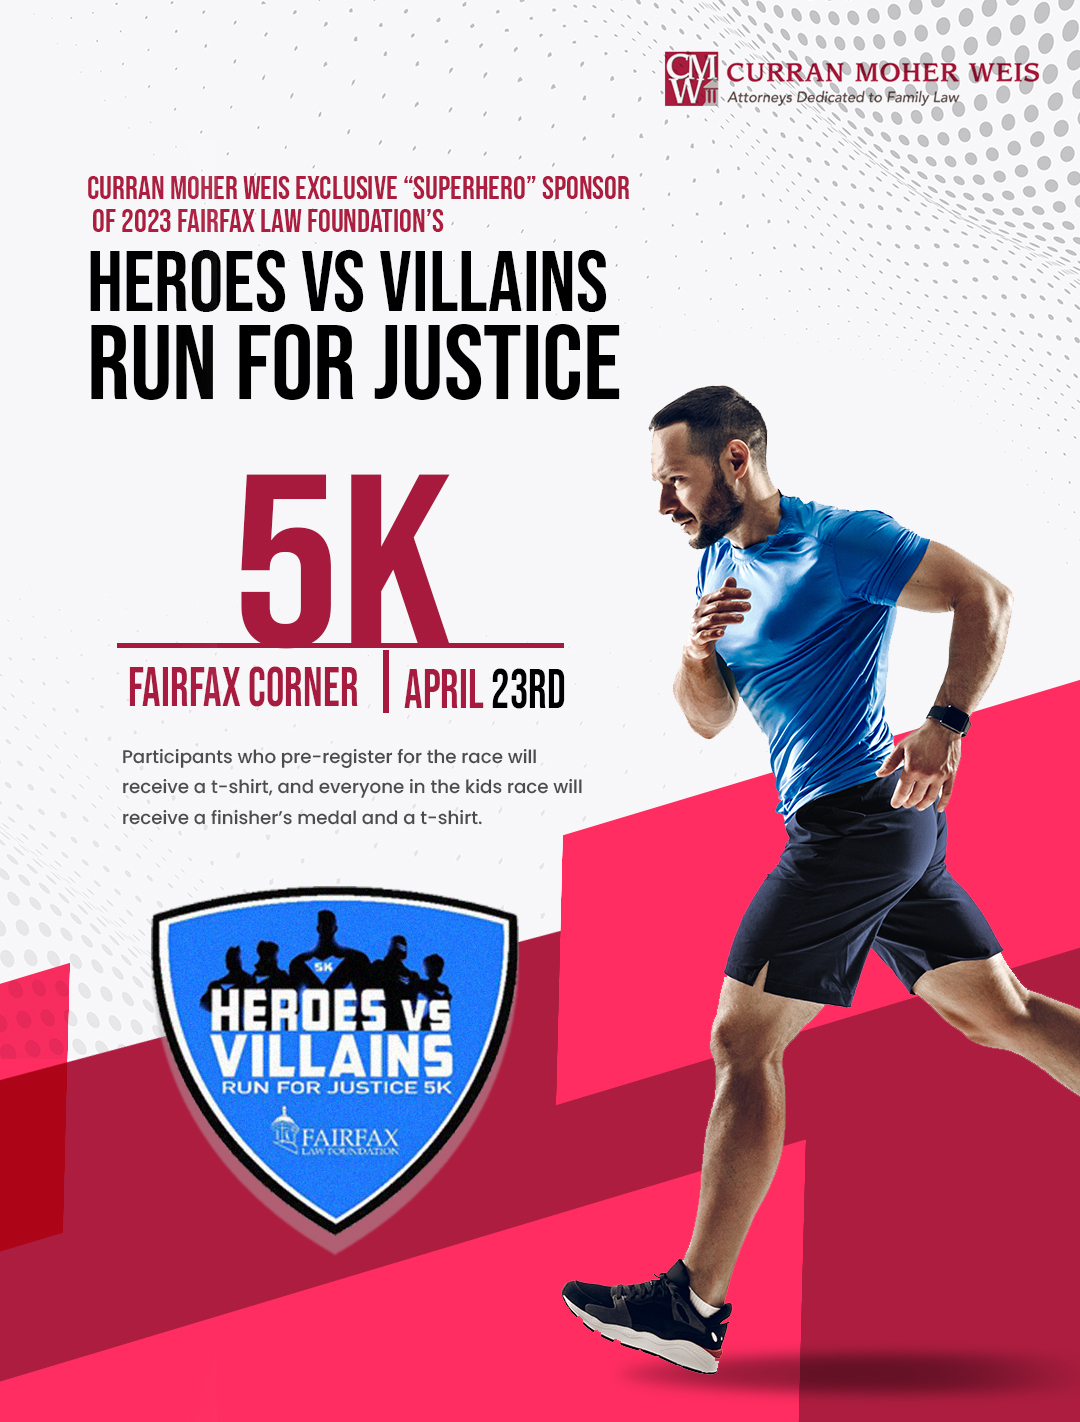 Curran Moher Weis takes on superhero role as exclusive sponsor for Heroes vs. Villains Run for Justice 5K